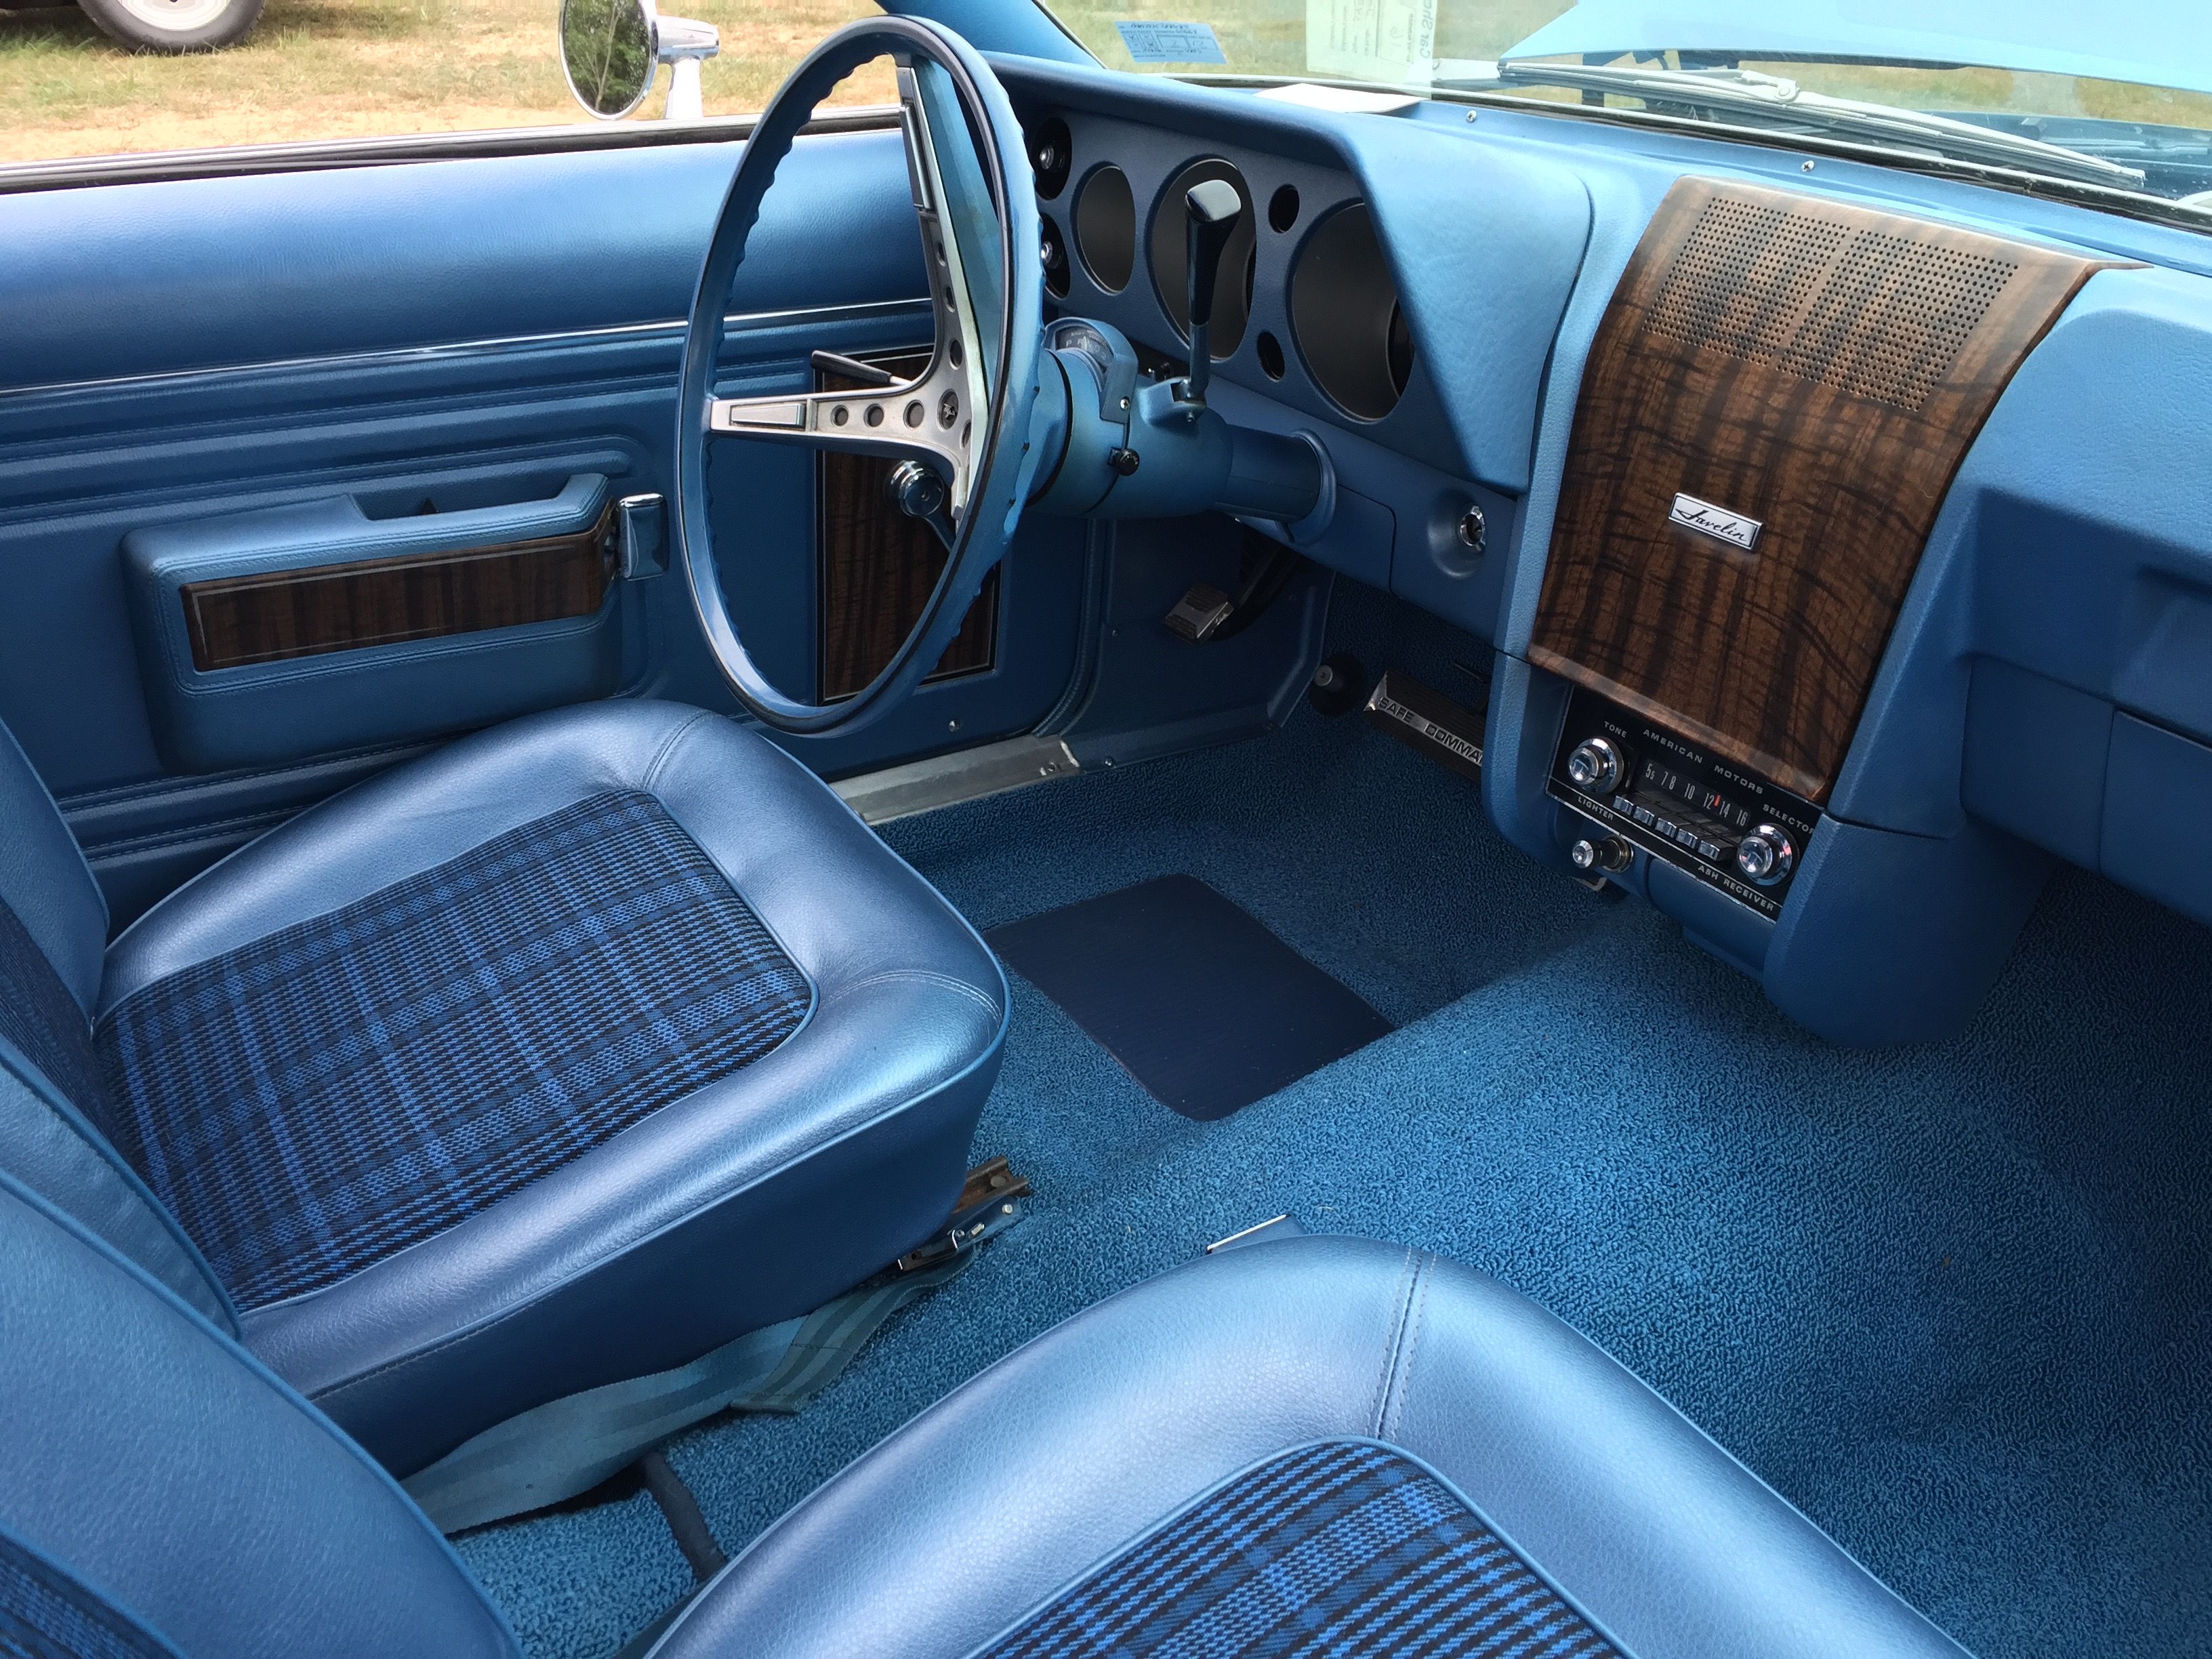 a picture of the interior of an AMC Javelin from Wikimedia Commons